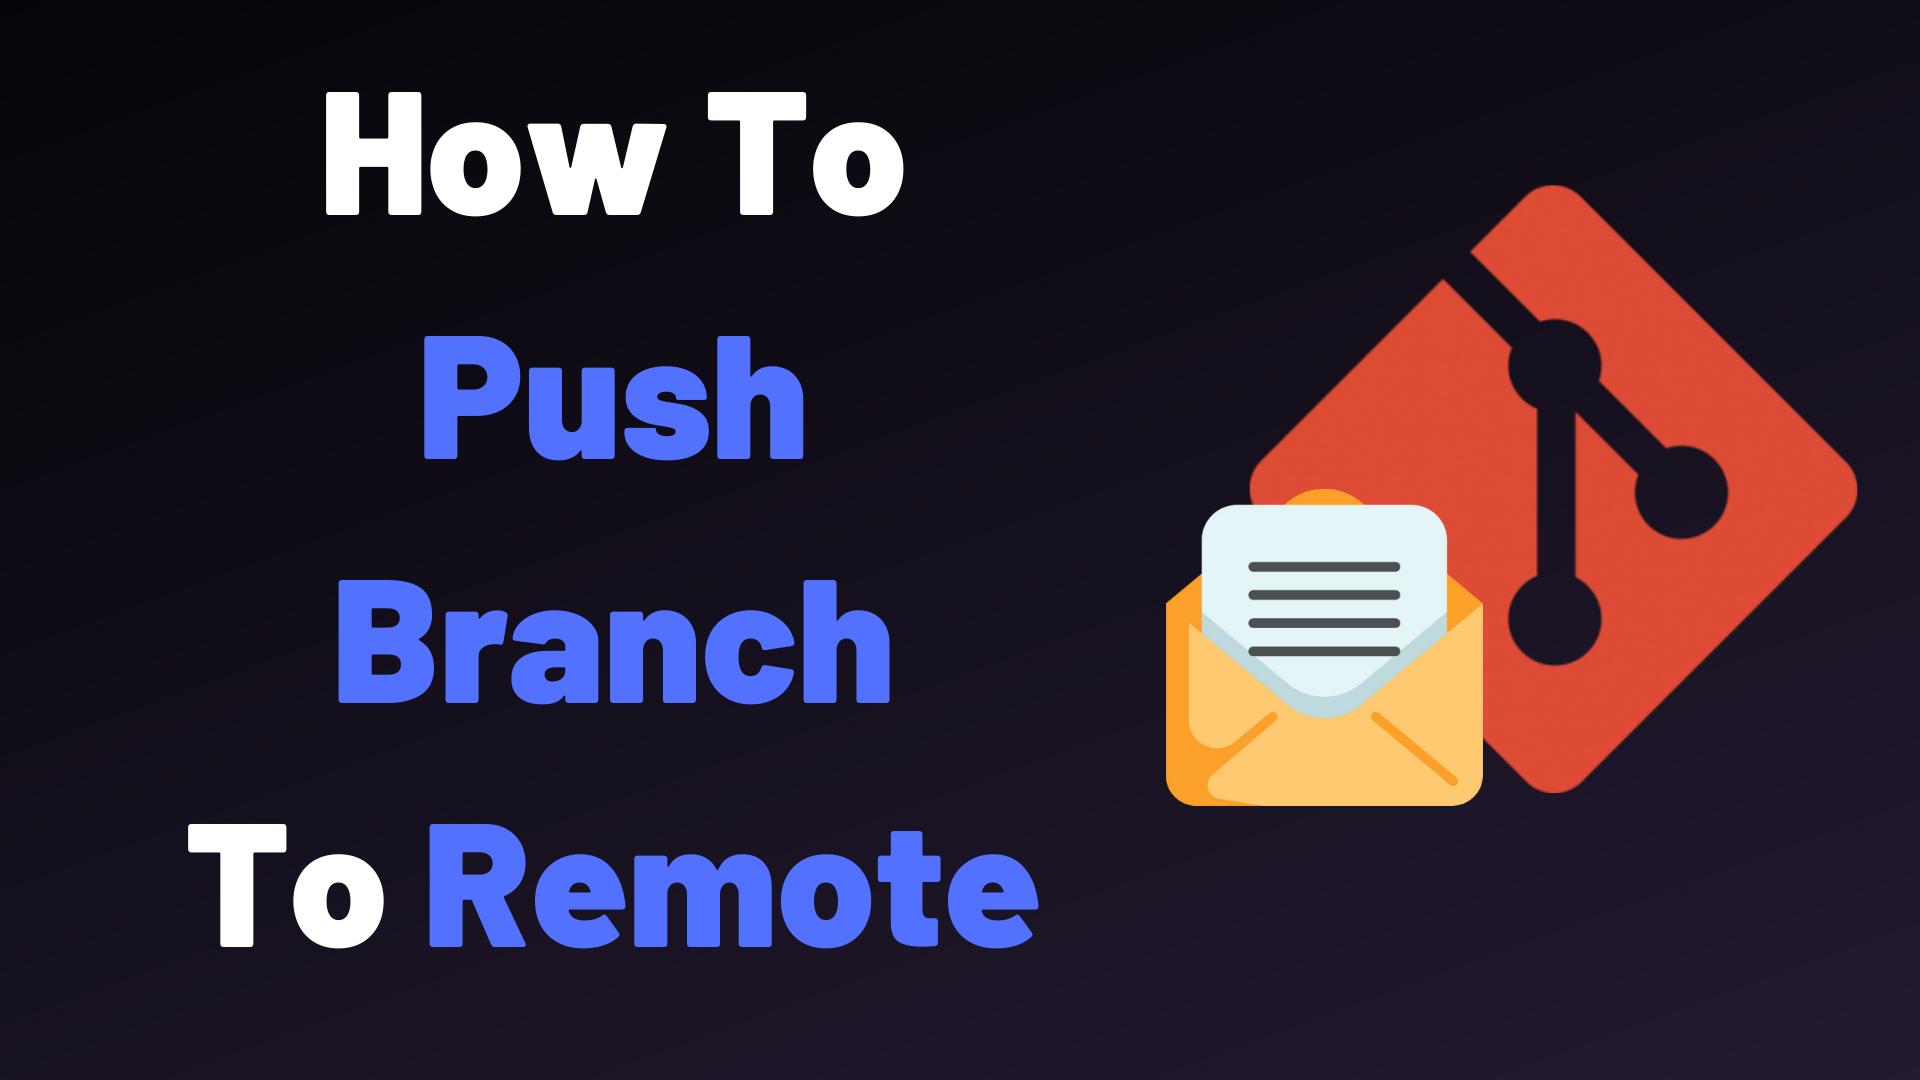 Pushing a Local Branch to Remote